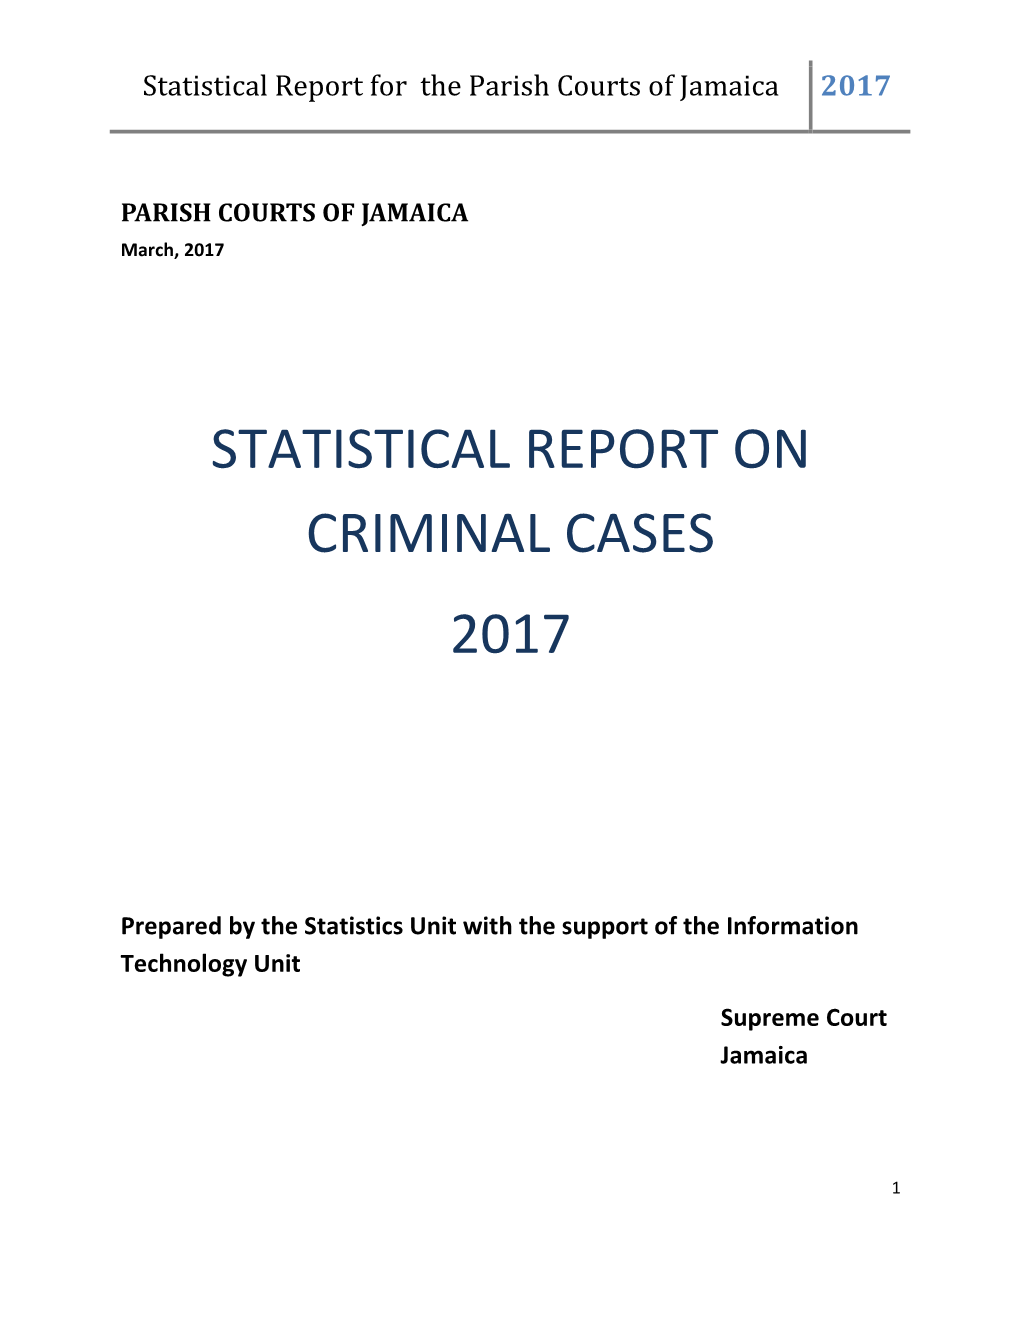 First Quarter Statistical Report on Criminal Matters in the Parish Courts